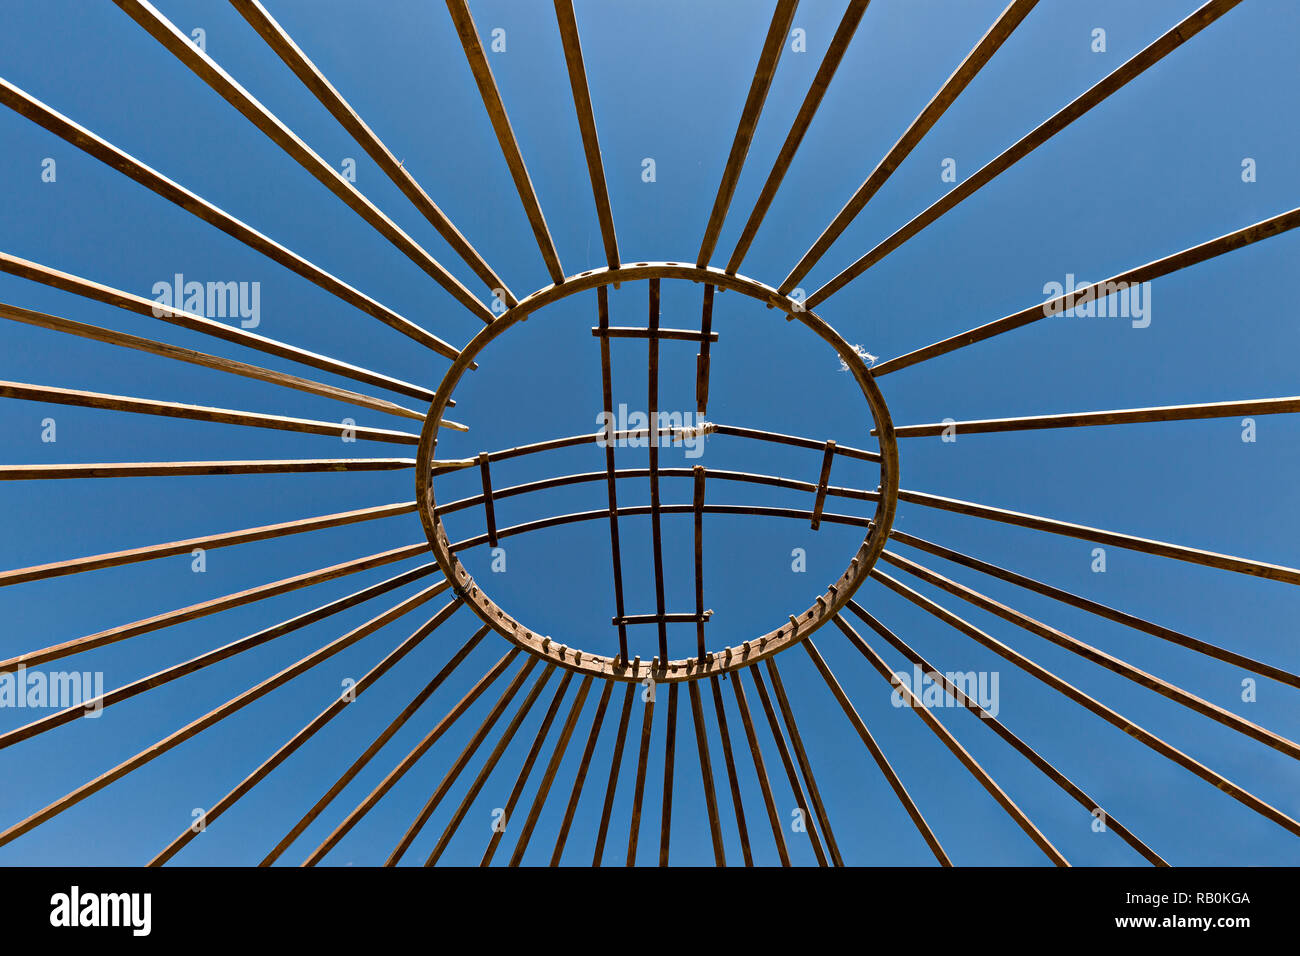 Top of the wooden sticks of a nomadic tent under construction, known as yurt, in Kazakhstan. Stock Photo